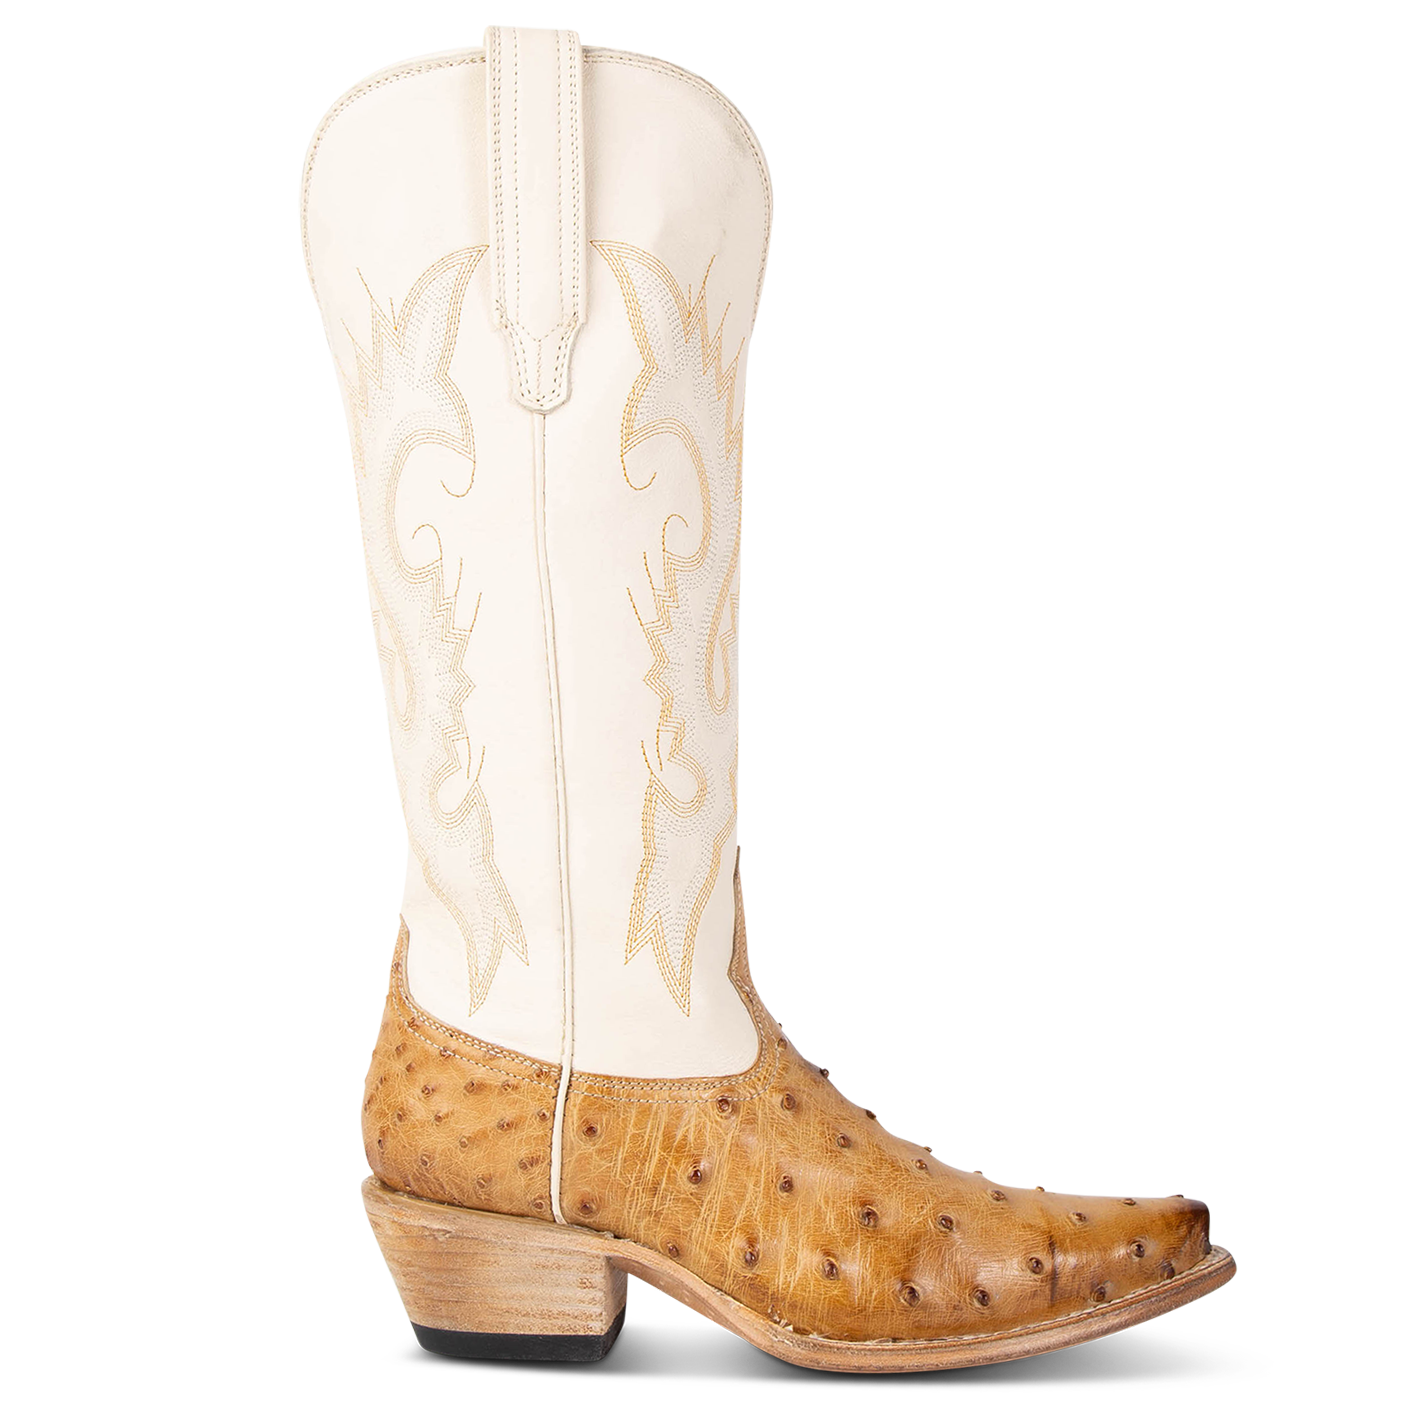 FREEBIRD women's Woodland wheat ostrich leather cowboy boot with stitch detailing and snip toe construction